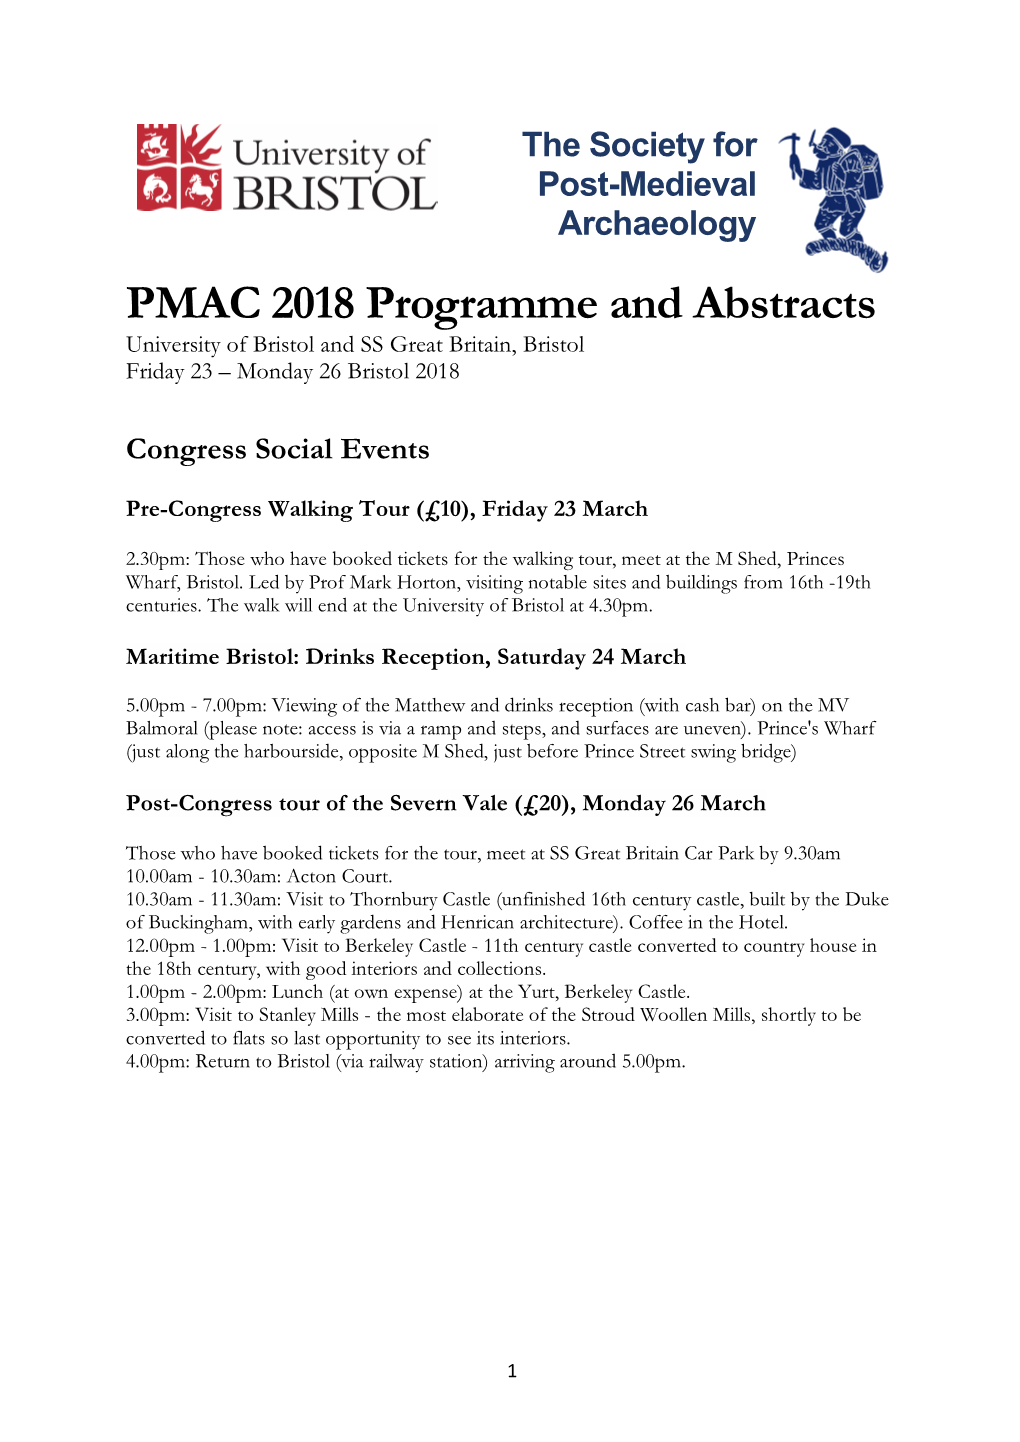 PMAC 2018 Programme and Abstracts University of Bristol and SS Great Britain, Bristol Friday 23 – Monday 26 Bristol 2018